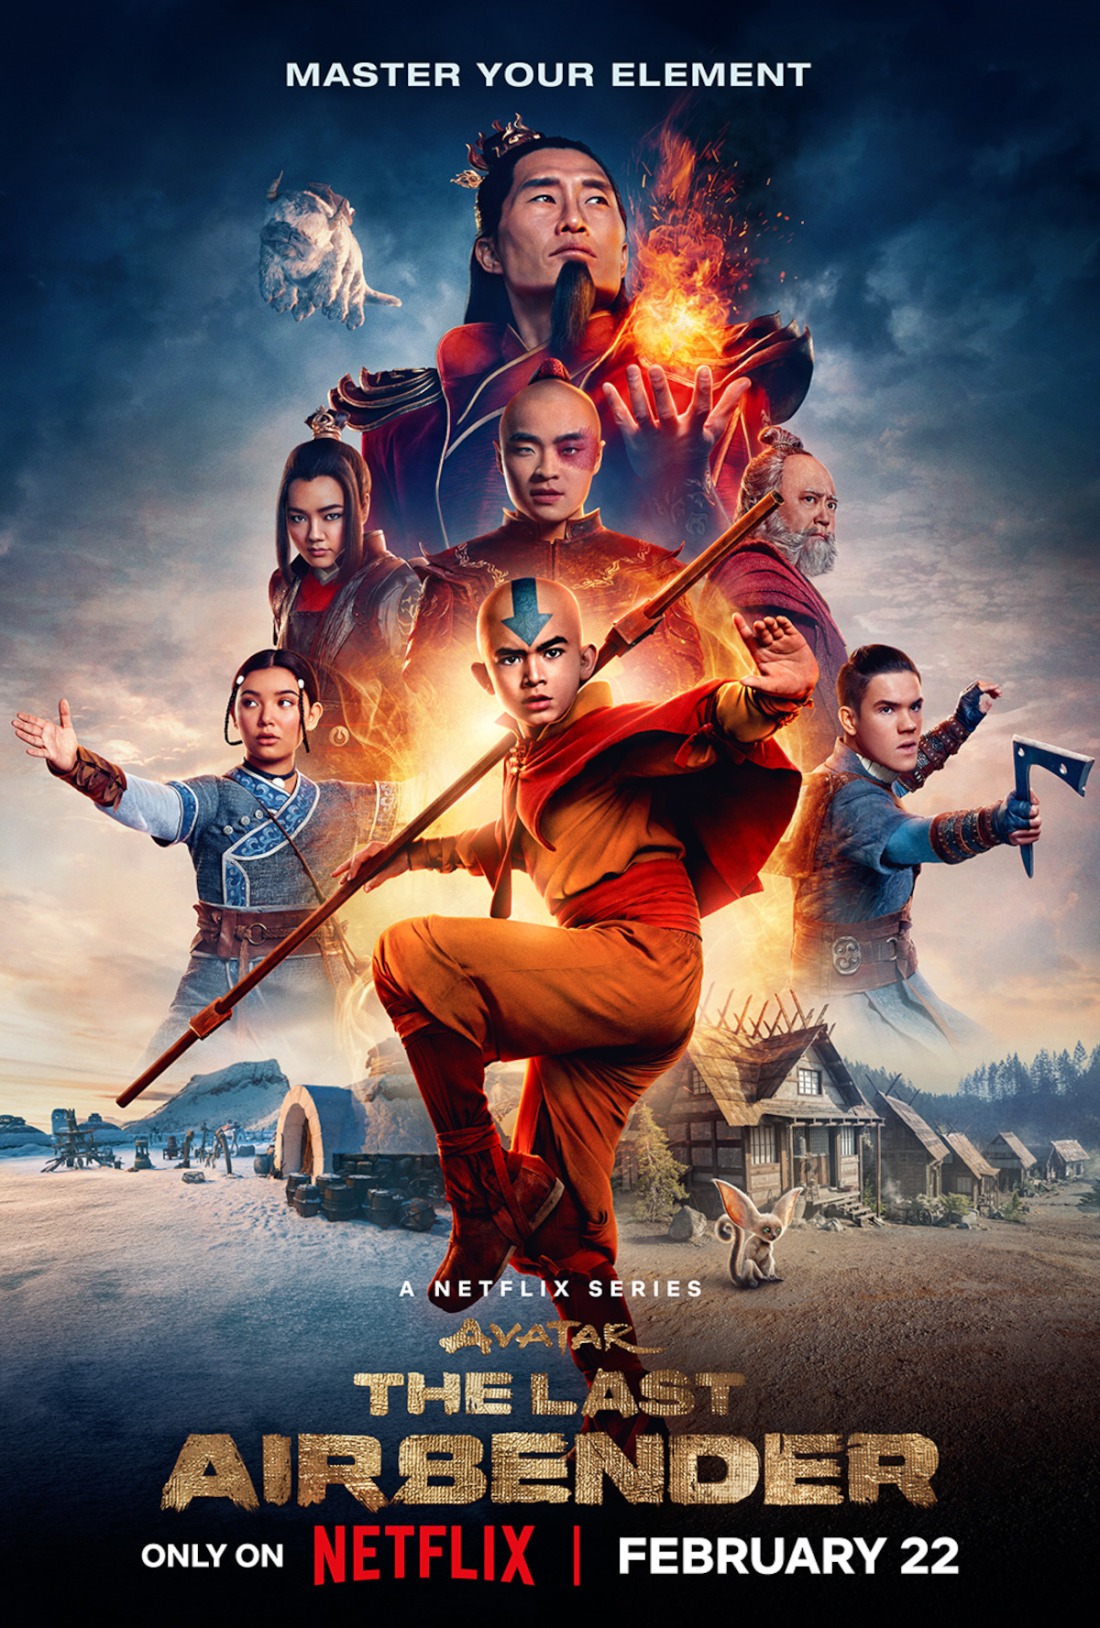 Poster for the live action remake of Avatar: The Last Airbender